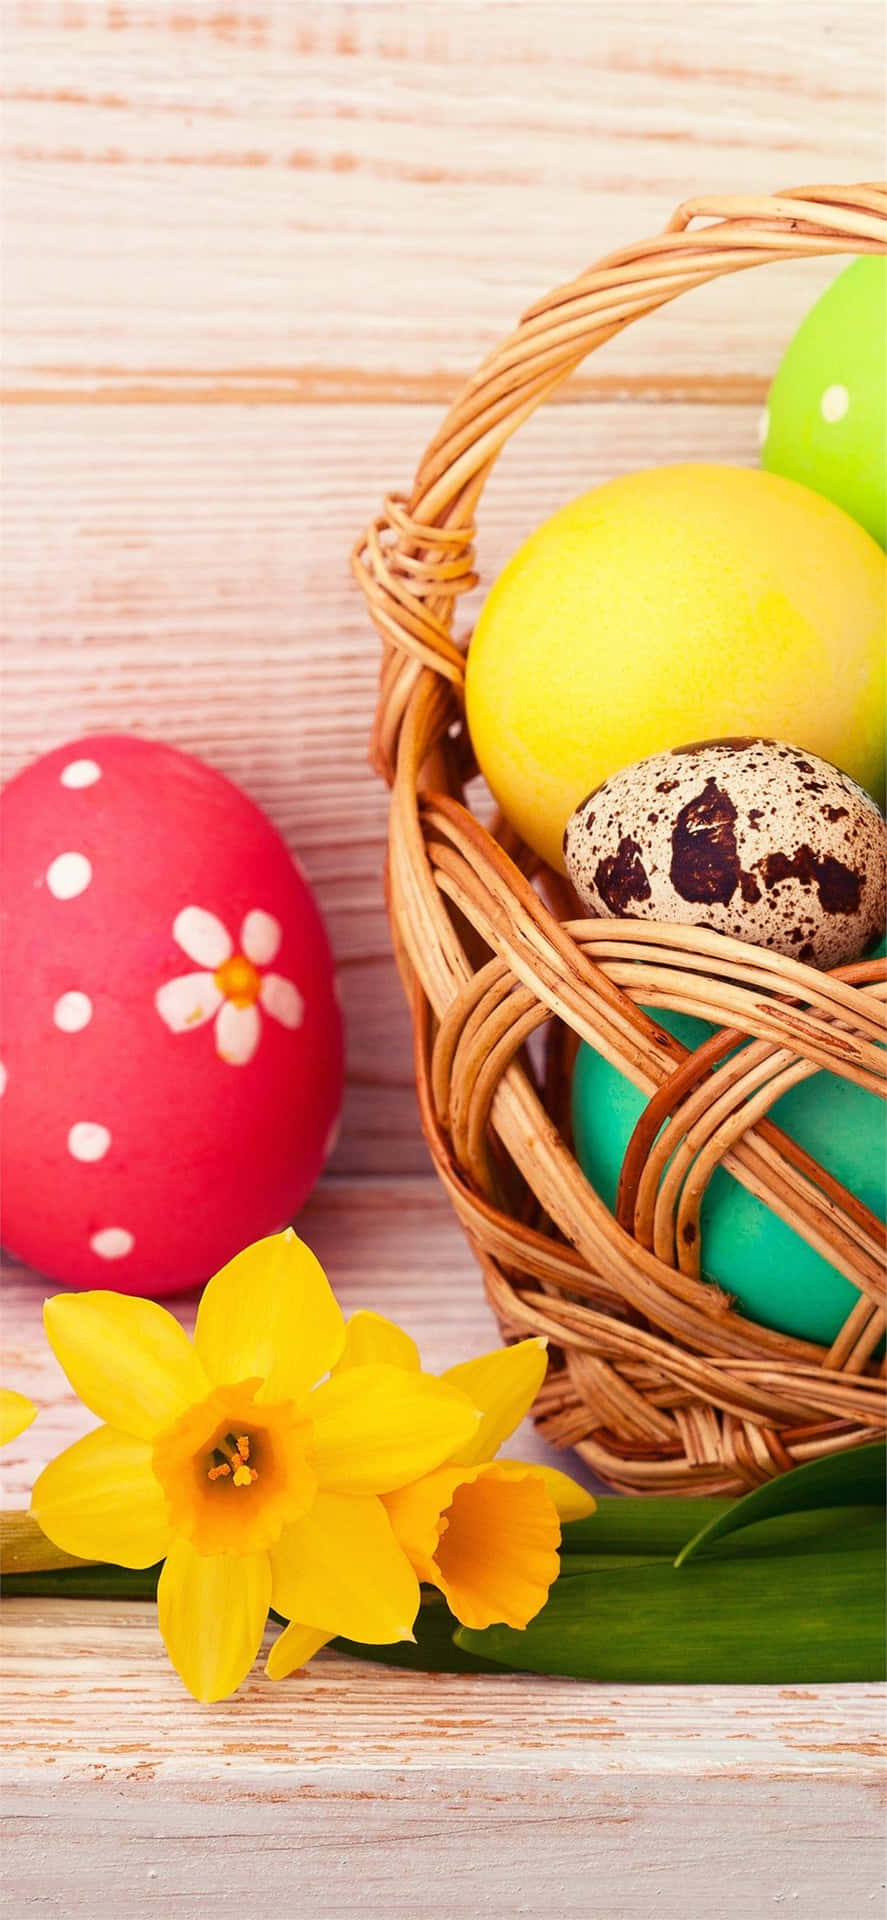 Cute Easter Iphone With Eggs In Basket Wallpaper